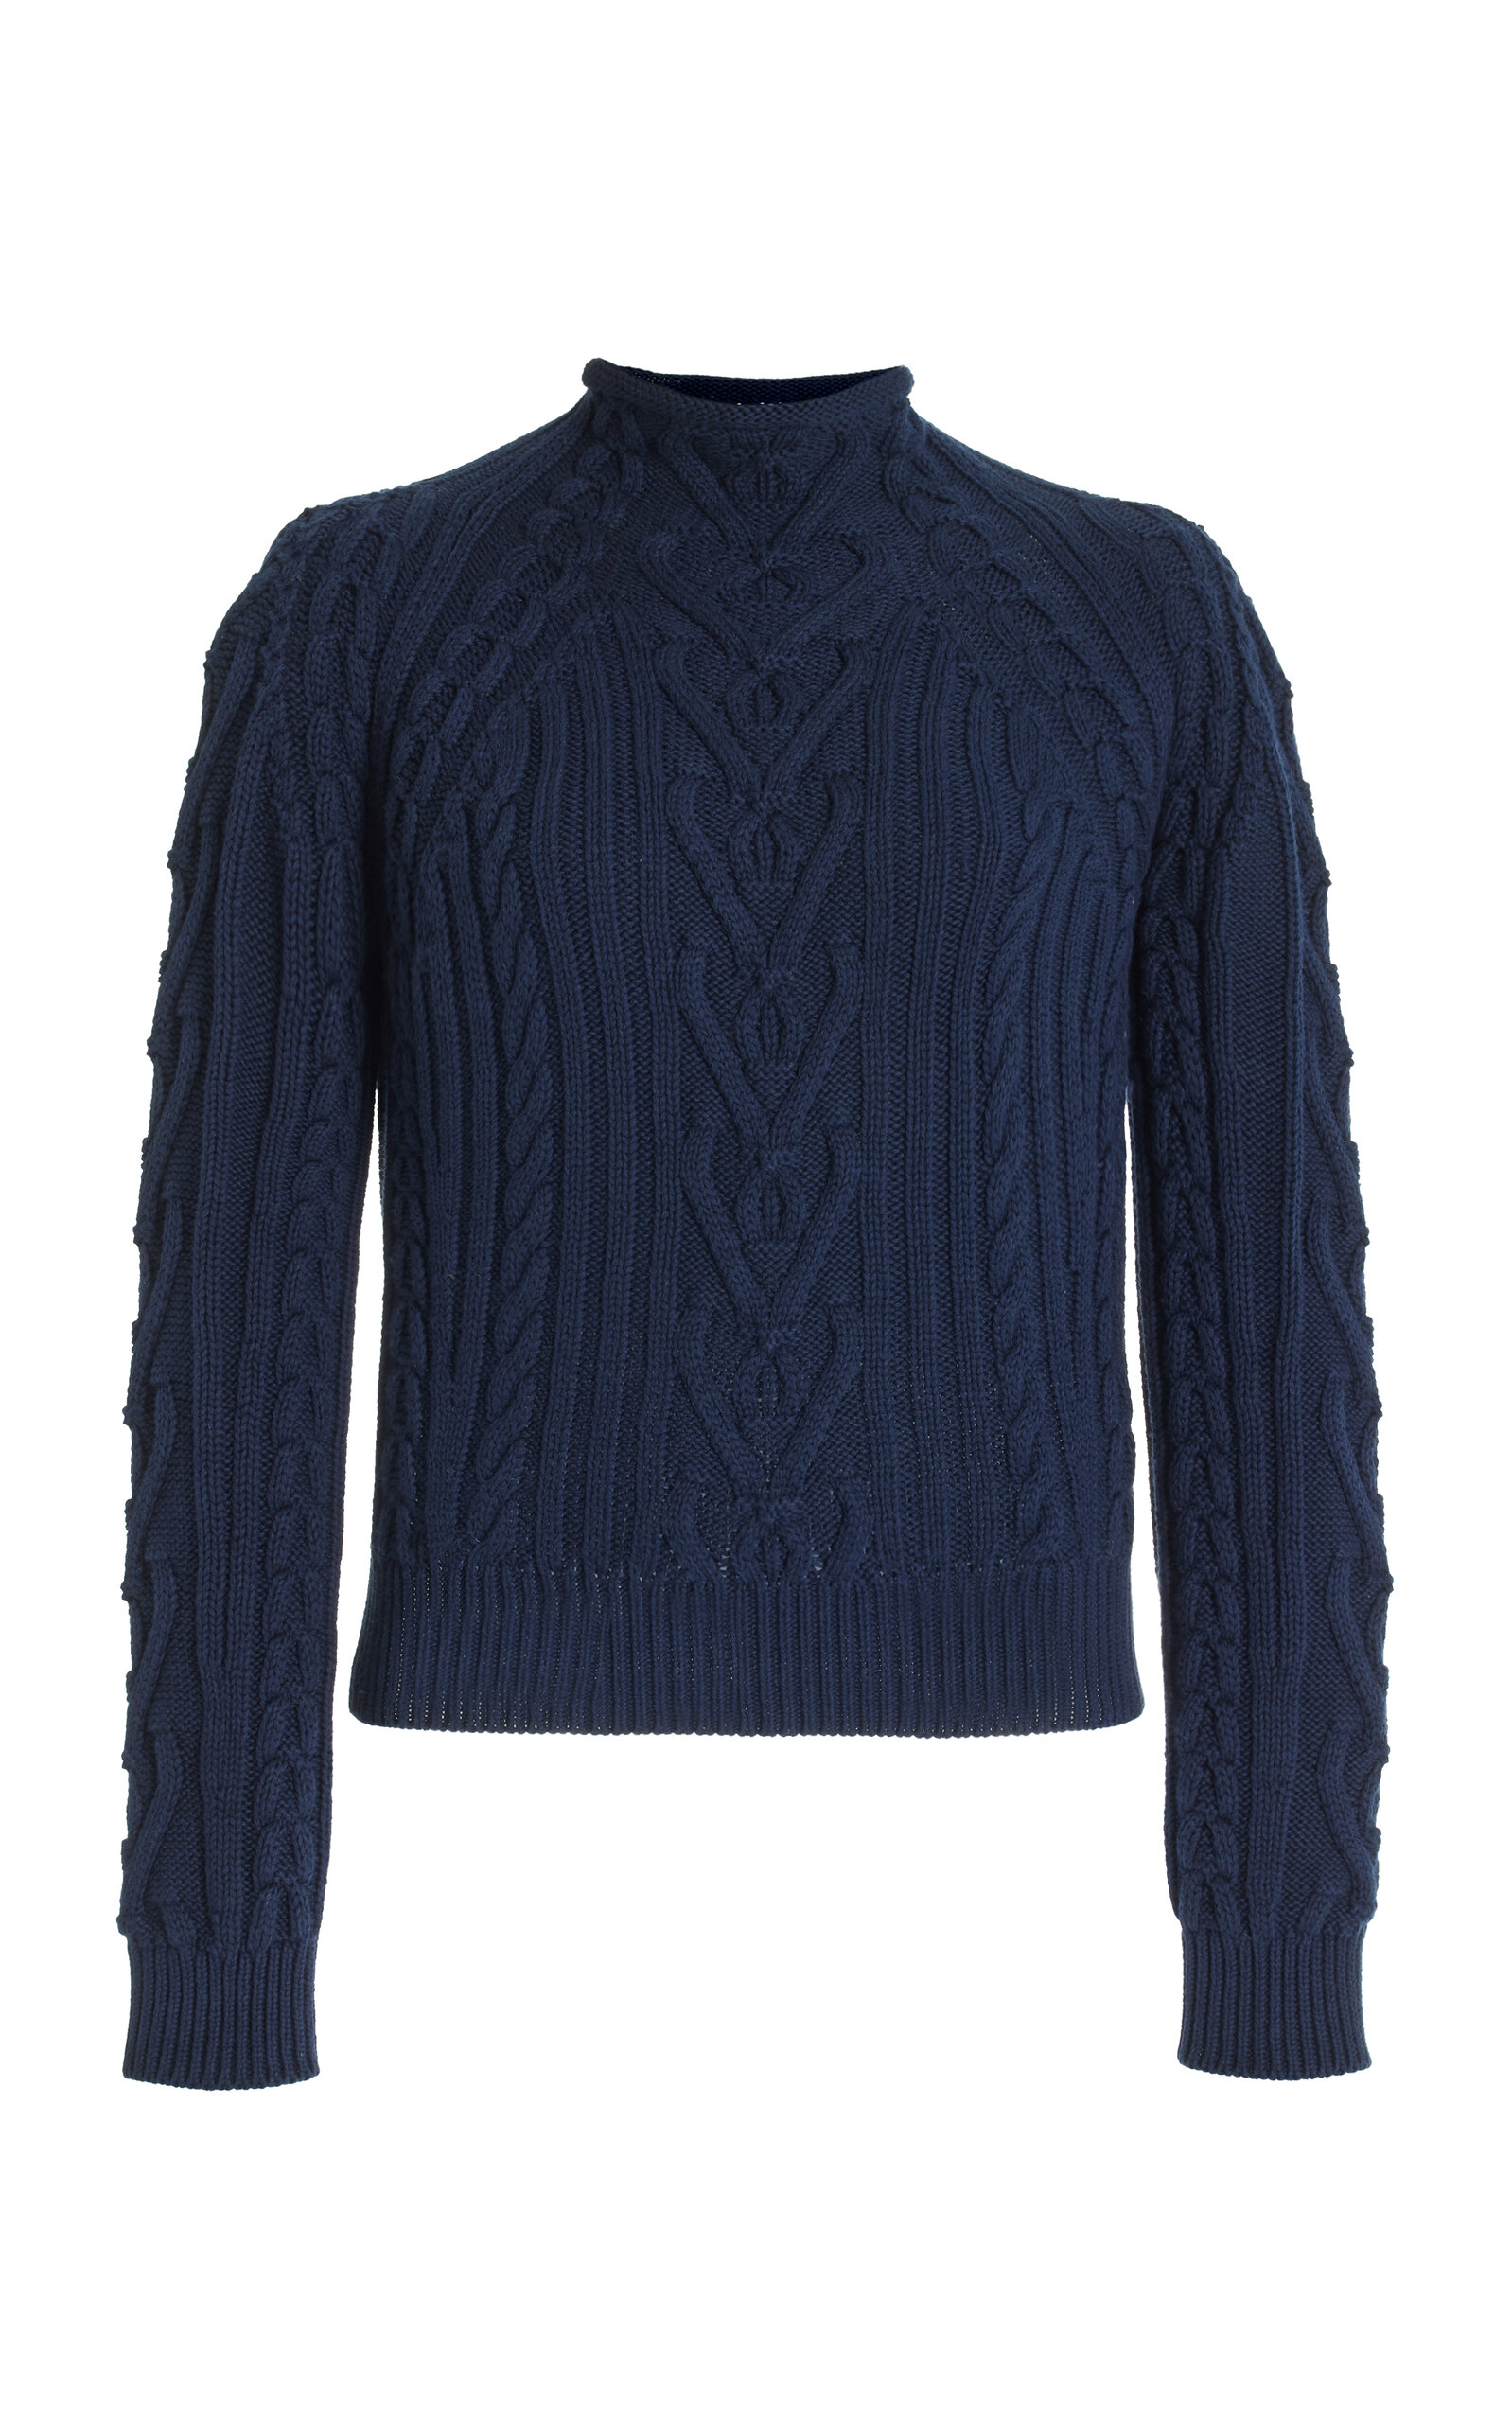 Exclusive Aran Cable-Knit Sweater